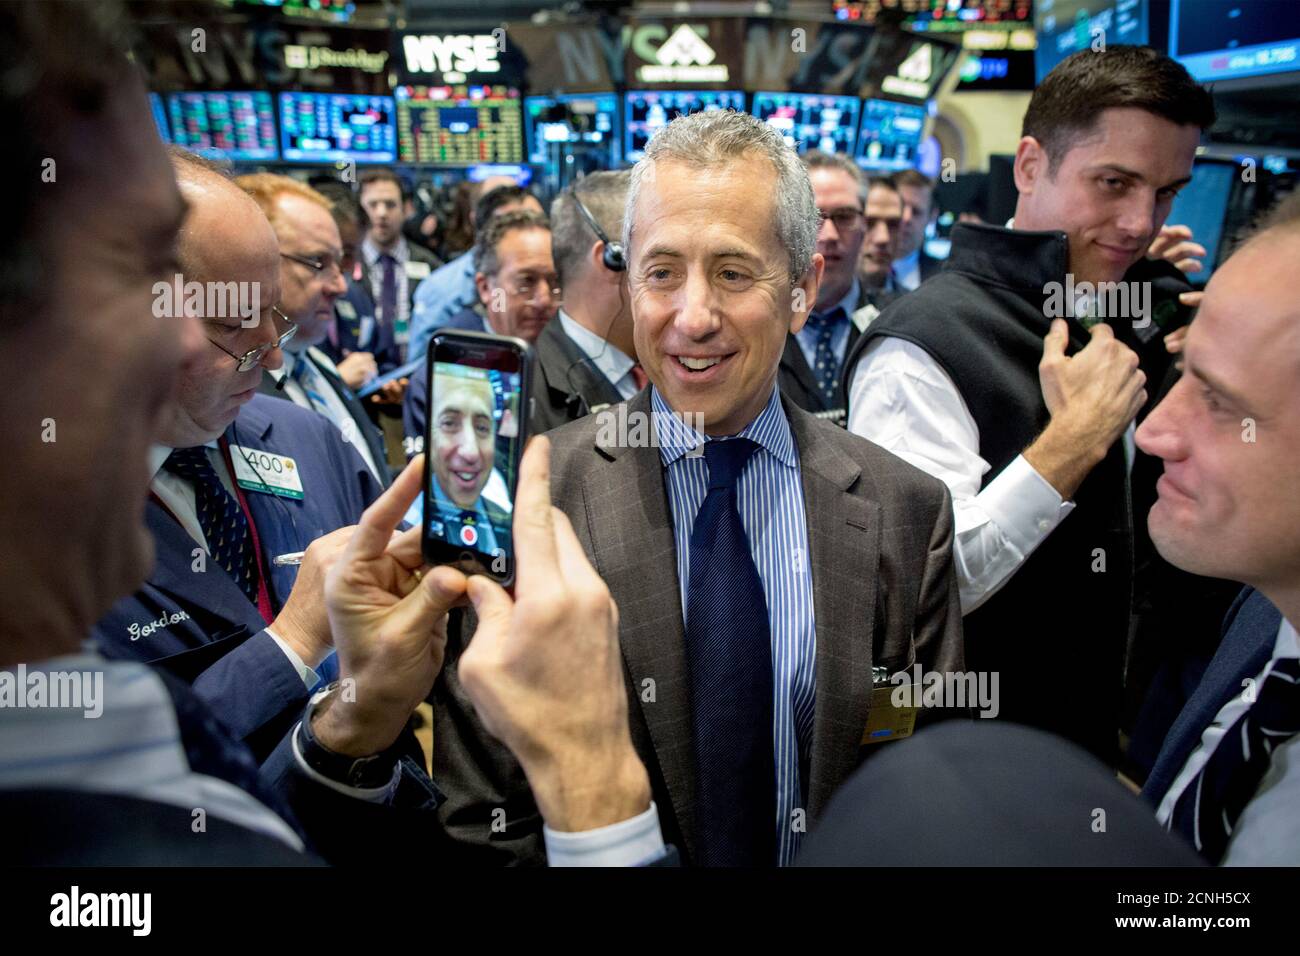 Shake Shack founder Danny Meyer is photographed during his company's IPO on the floor of the New York Stock Exchange January 30, 2015. Shares of gourmet hamburger chain Shake Shack Inc soared 150 percent in their first few minutes of trading on Friday, valuing the company that grew out of a hotdog cart in New York's Madison Square Park at nearly $2 billion. REUTERS/Brendan McDermid (UNITED STATES - Tags: BUSINESS FOOD) Stock Photo